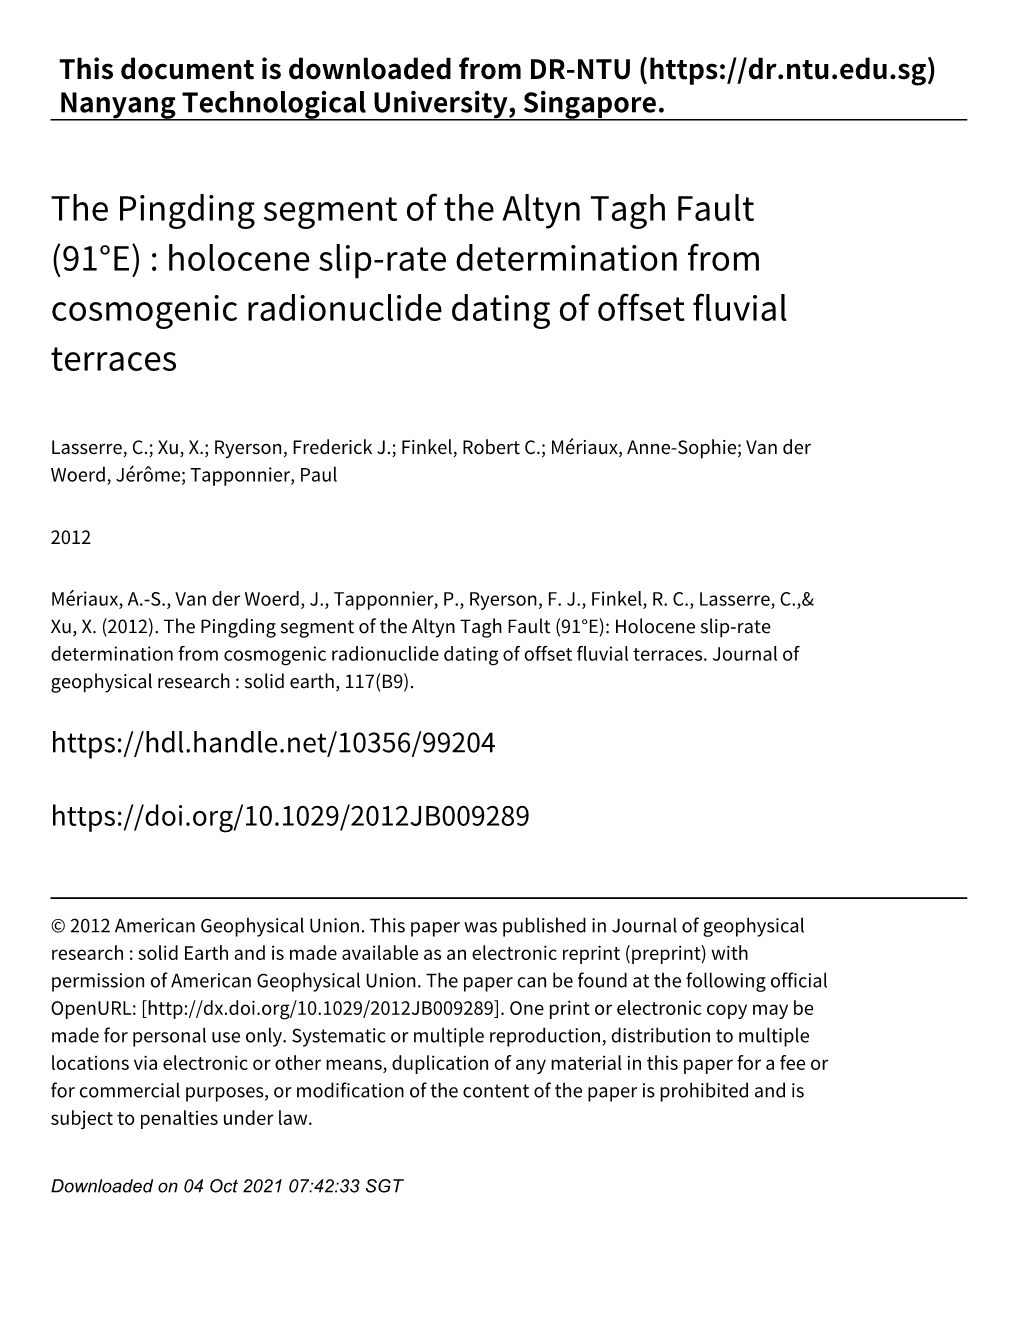 The Pingding Segment of the Altyn Tagh Fault (91°E) : Holocene Slip‑Rate Determination from Cosmogenic Radionuclide Dating of Offset Fluvial Terraces